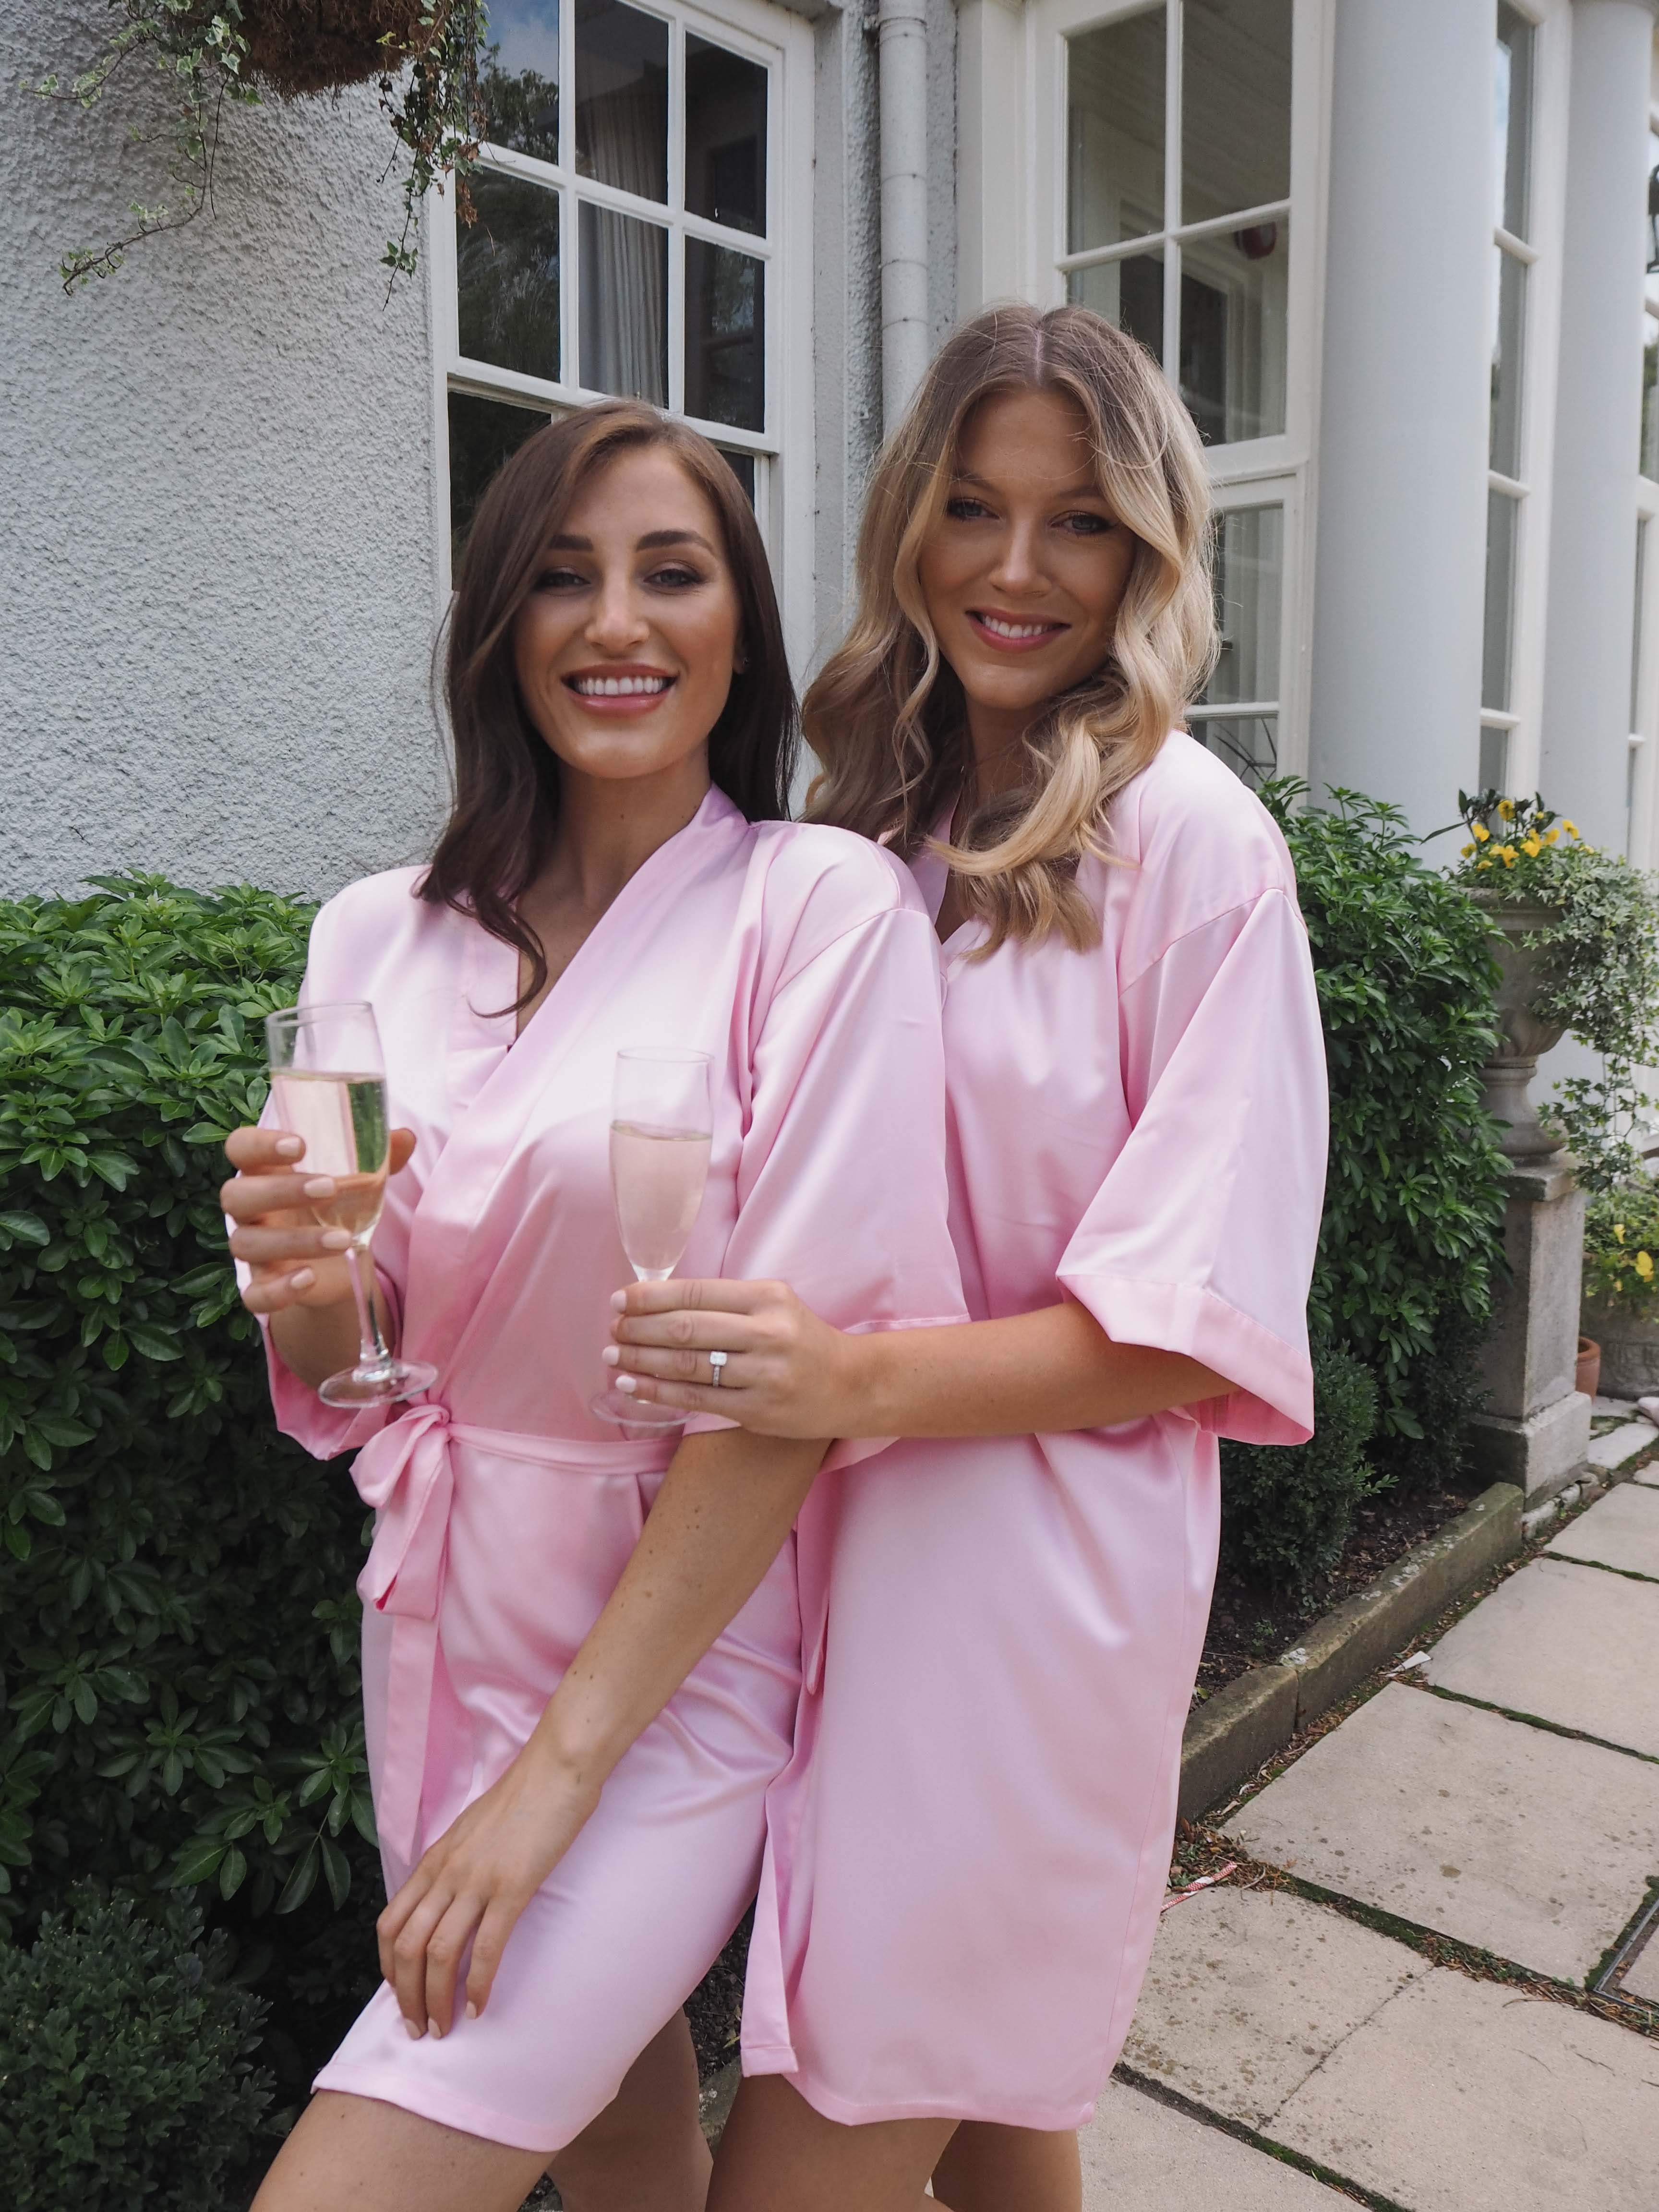 Baby pink satin robes - Robes4you